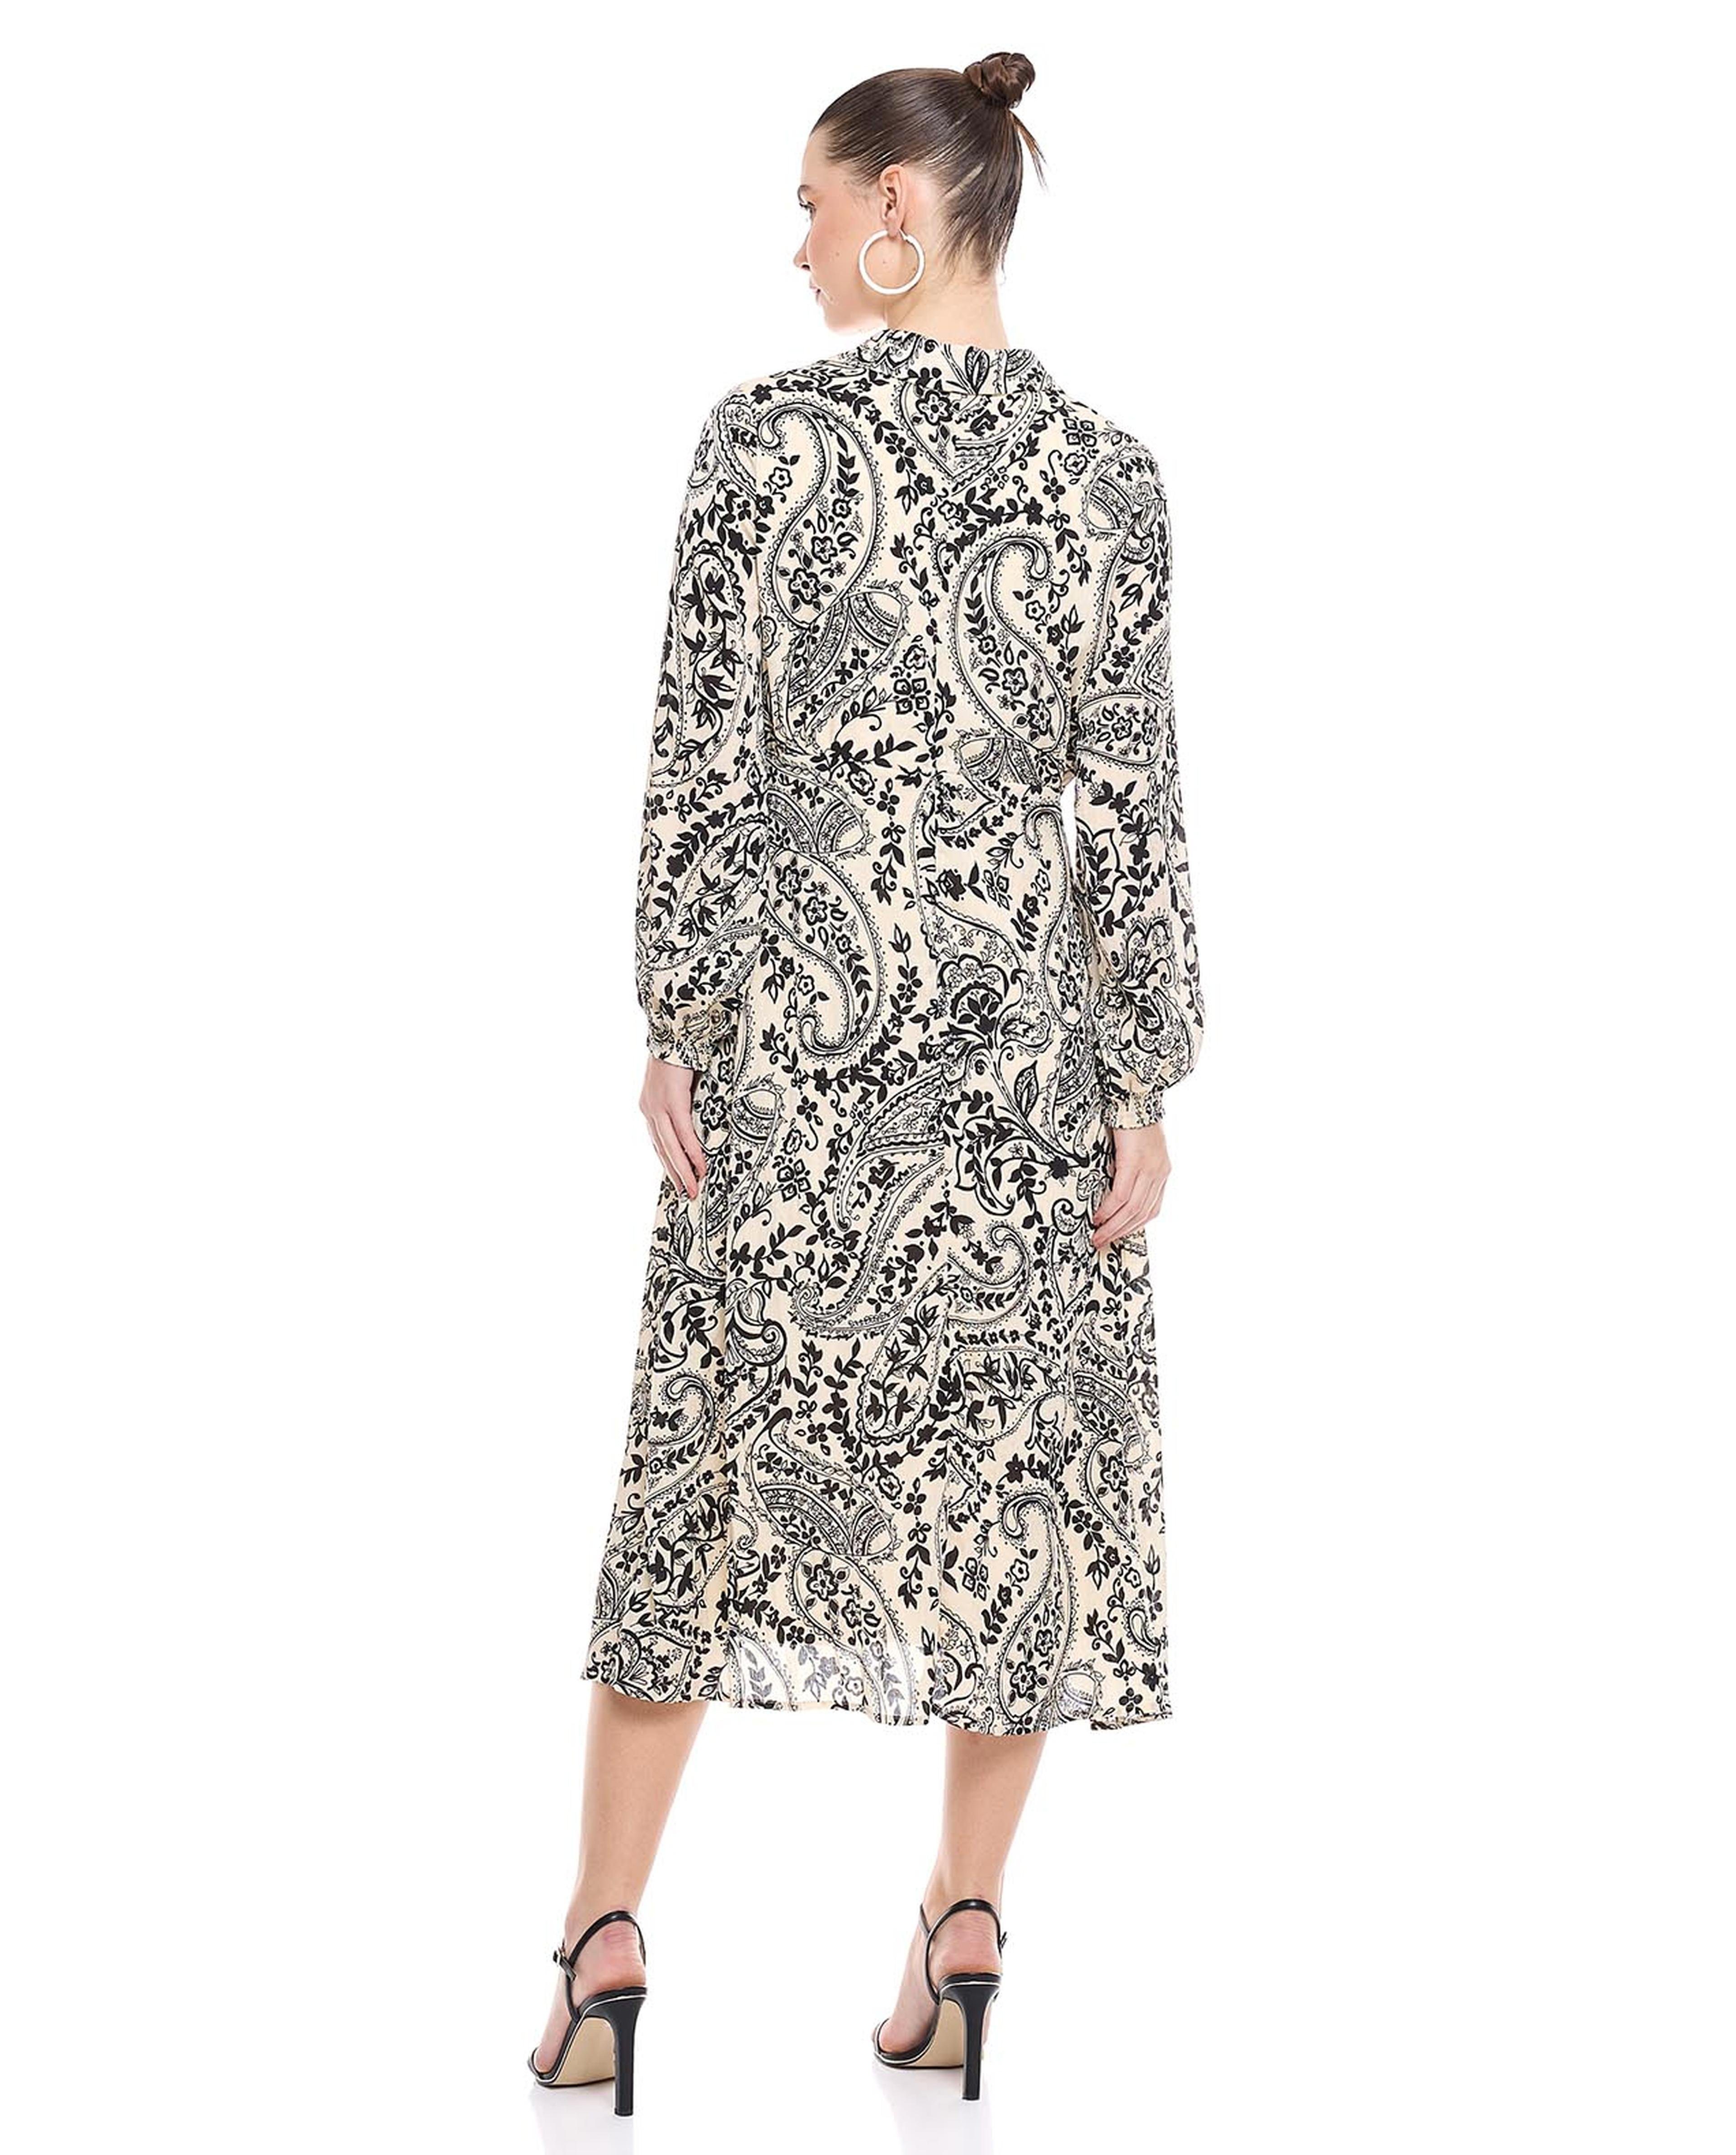 Paisley Print A-Line Dress with V-Neck and Bishop Sleeves